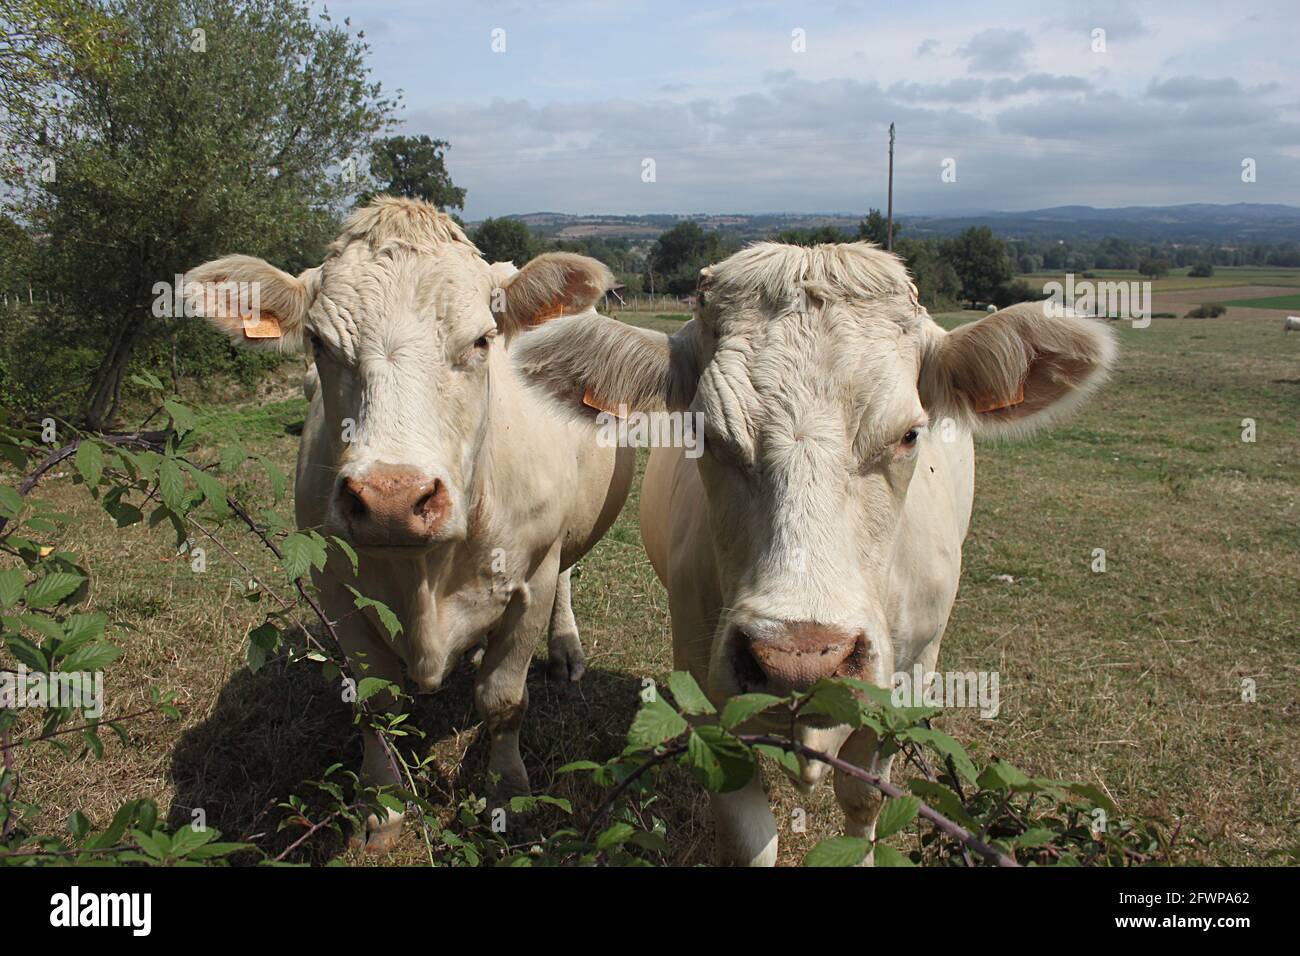 Charolais cattle in central France. The breed, primarily raised for meat, originated in Charolles in the Saone-et-Loire department of central France. Stock Photo